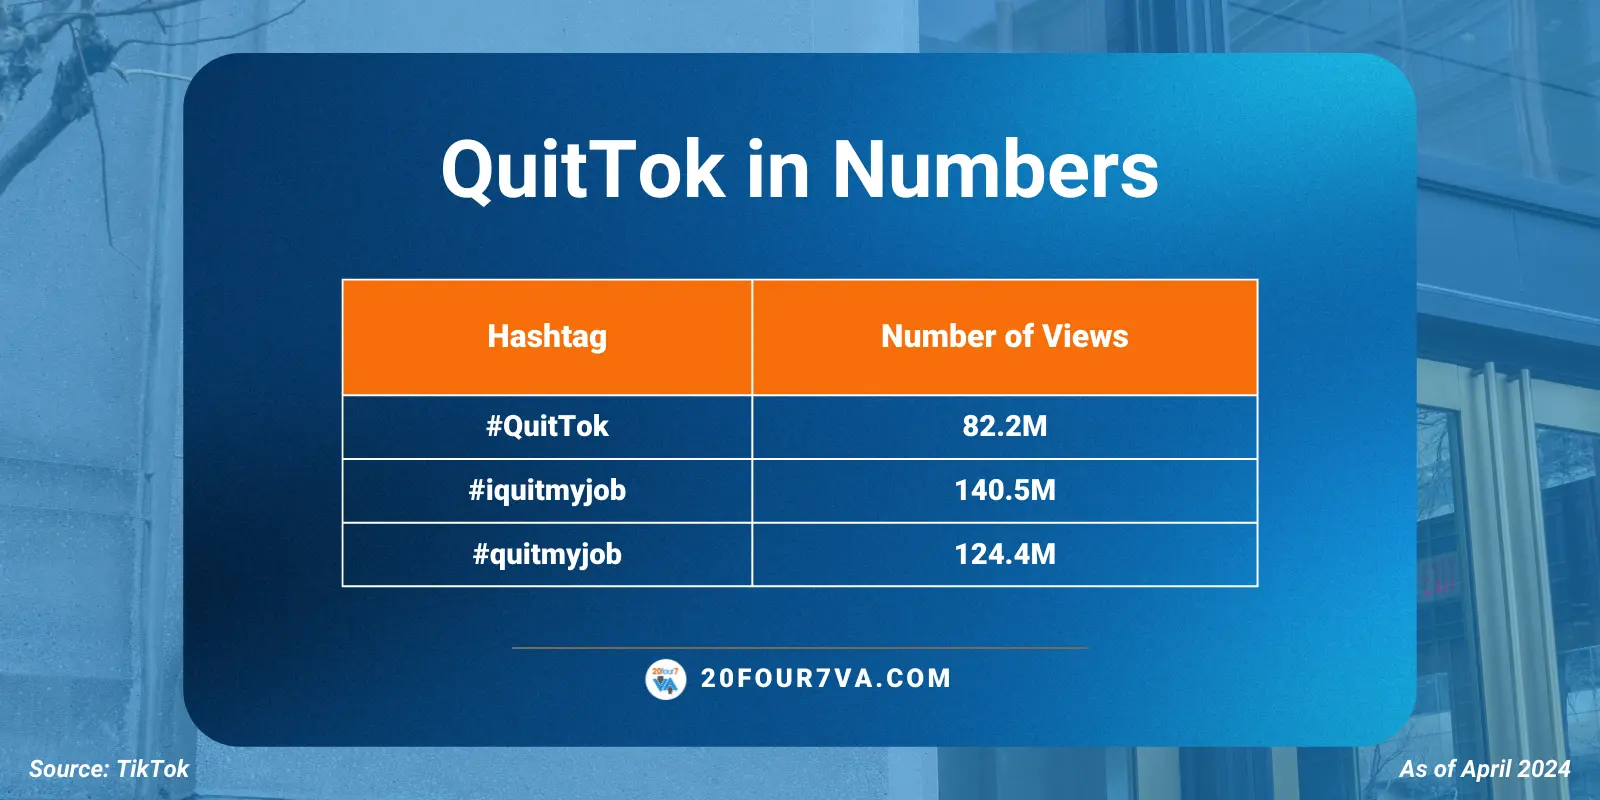 Quittok in Numbers